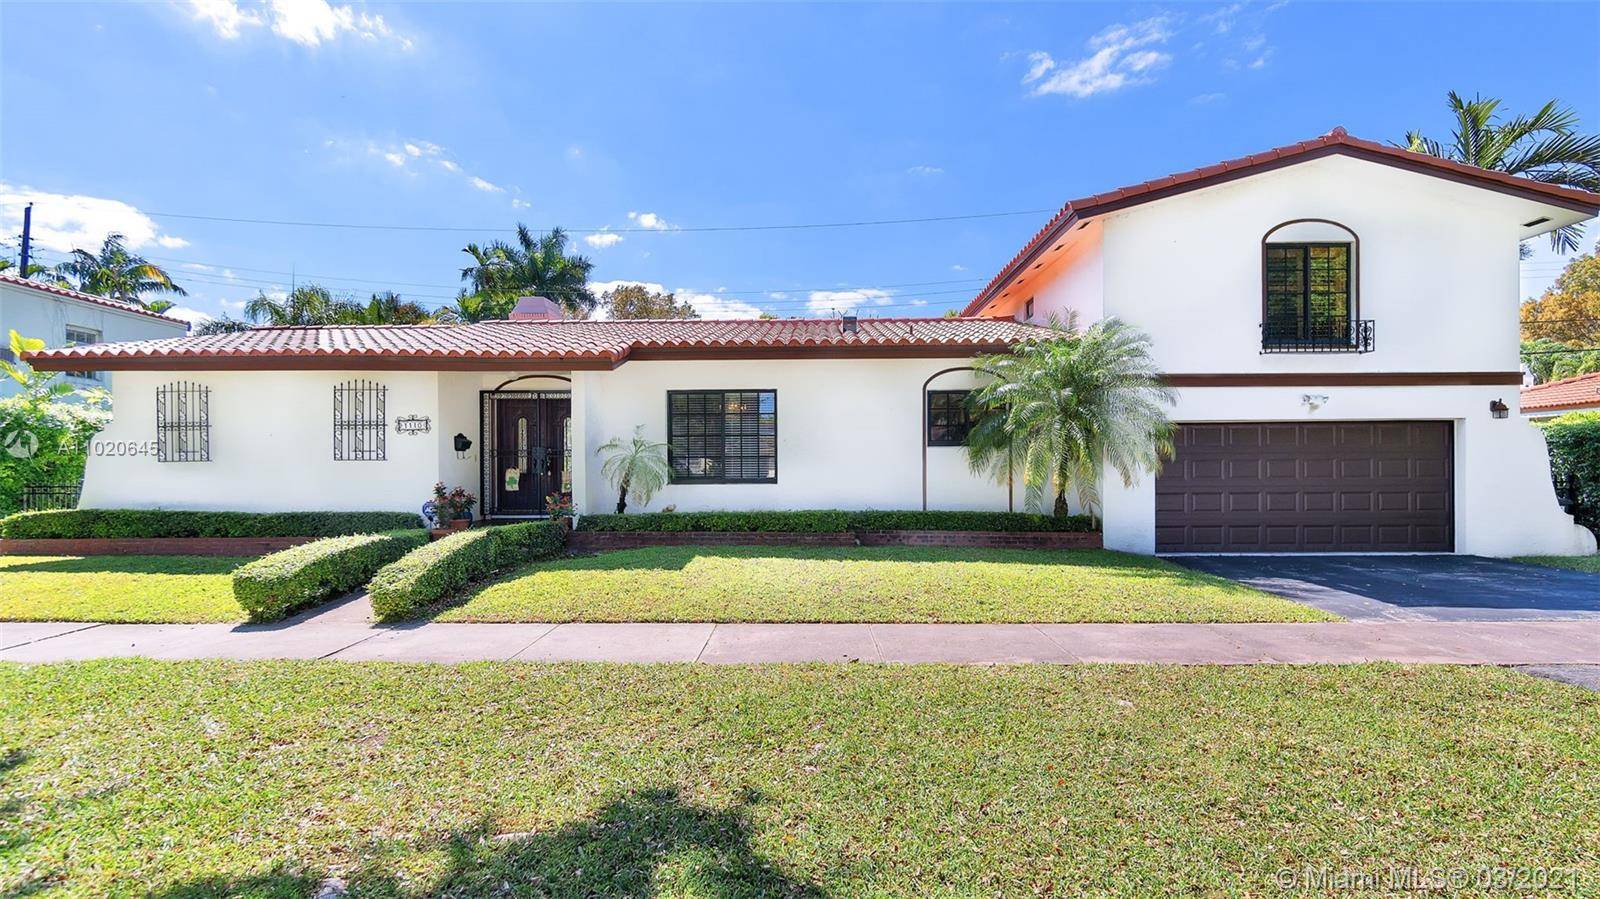 A must see beautiful home on the prestigious and sought after Granada Boulevard.